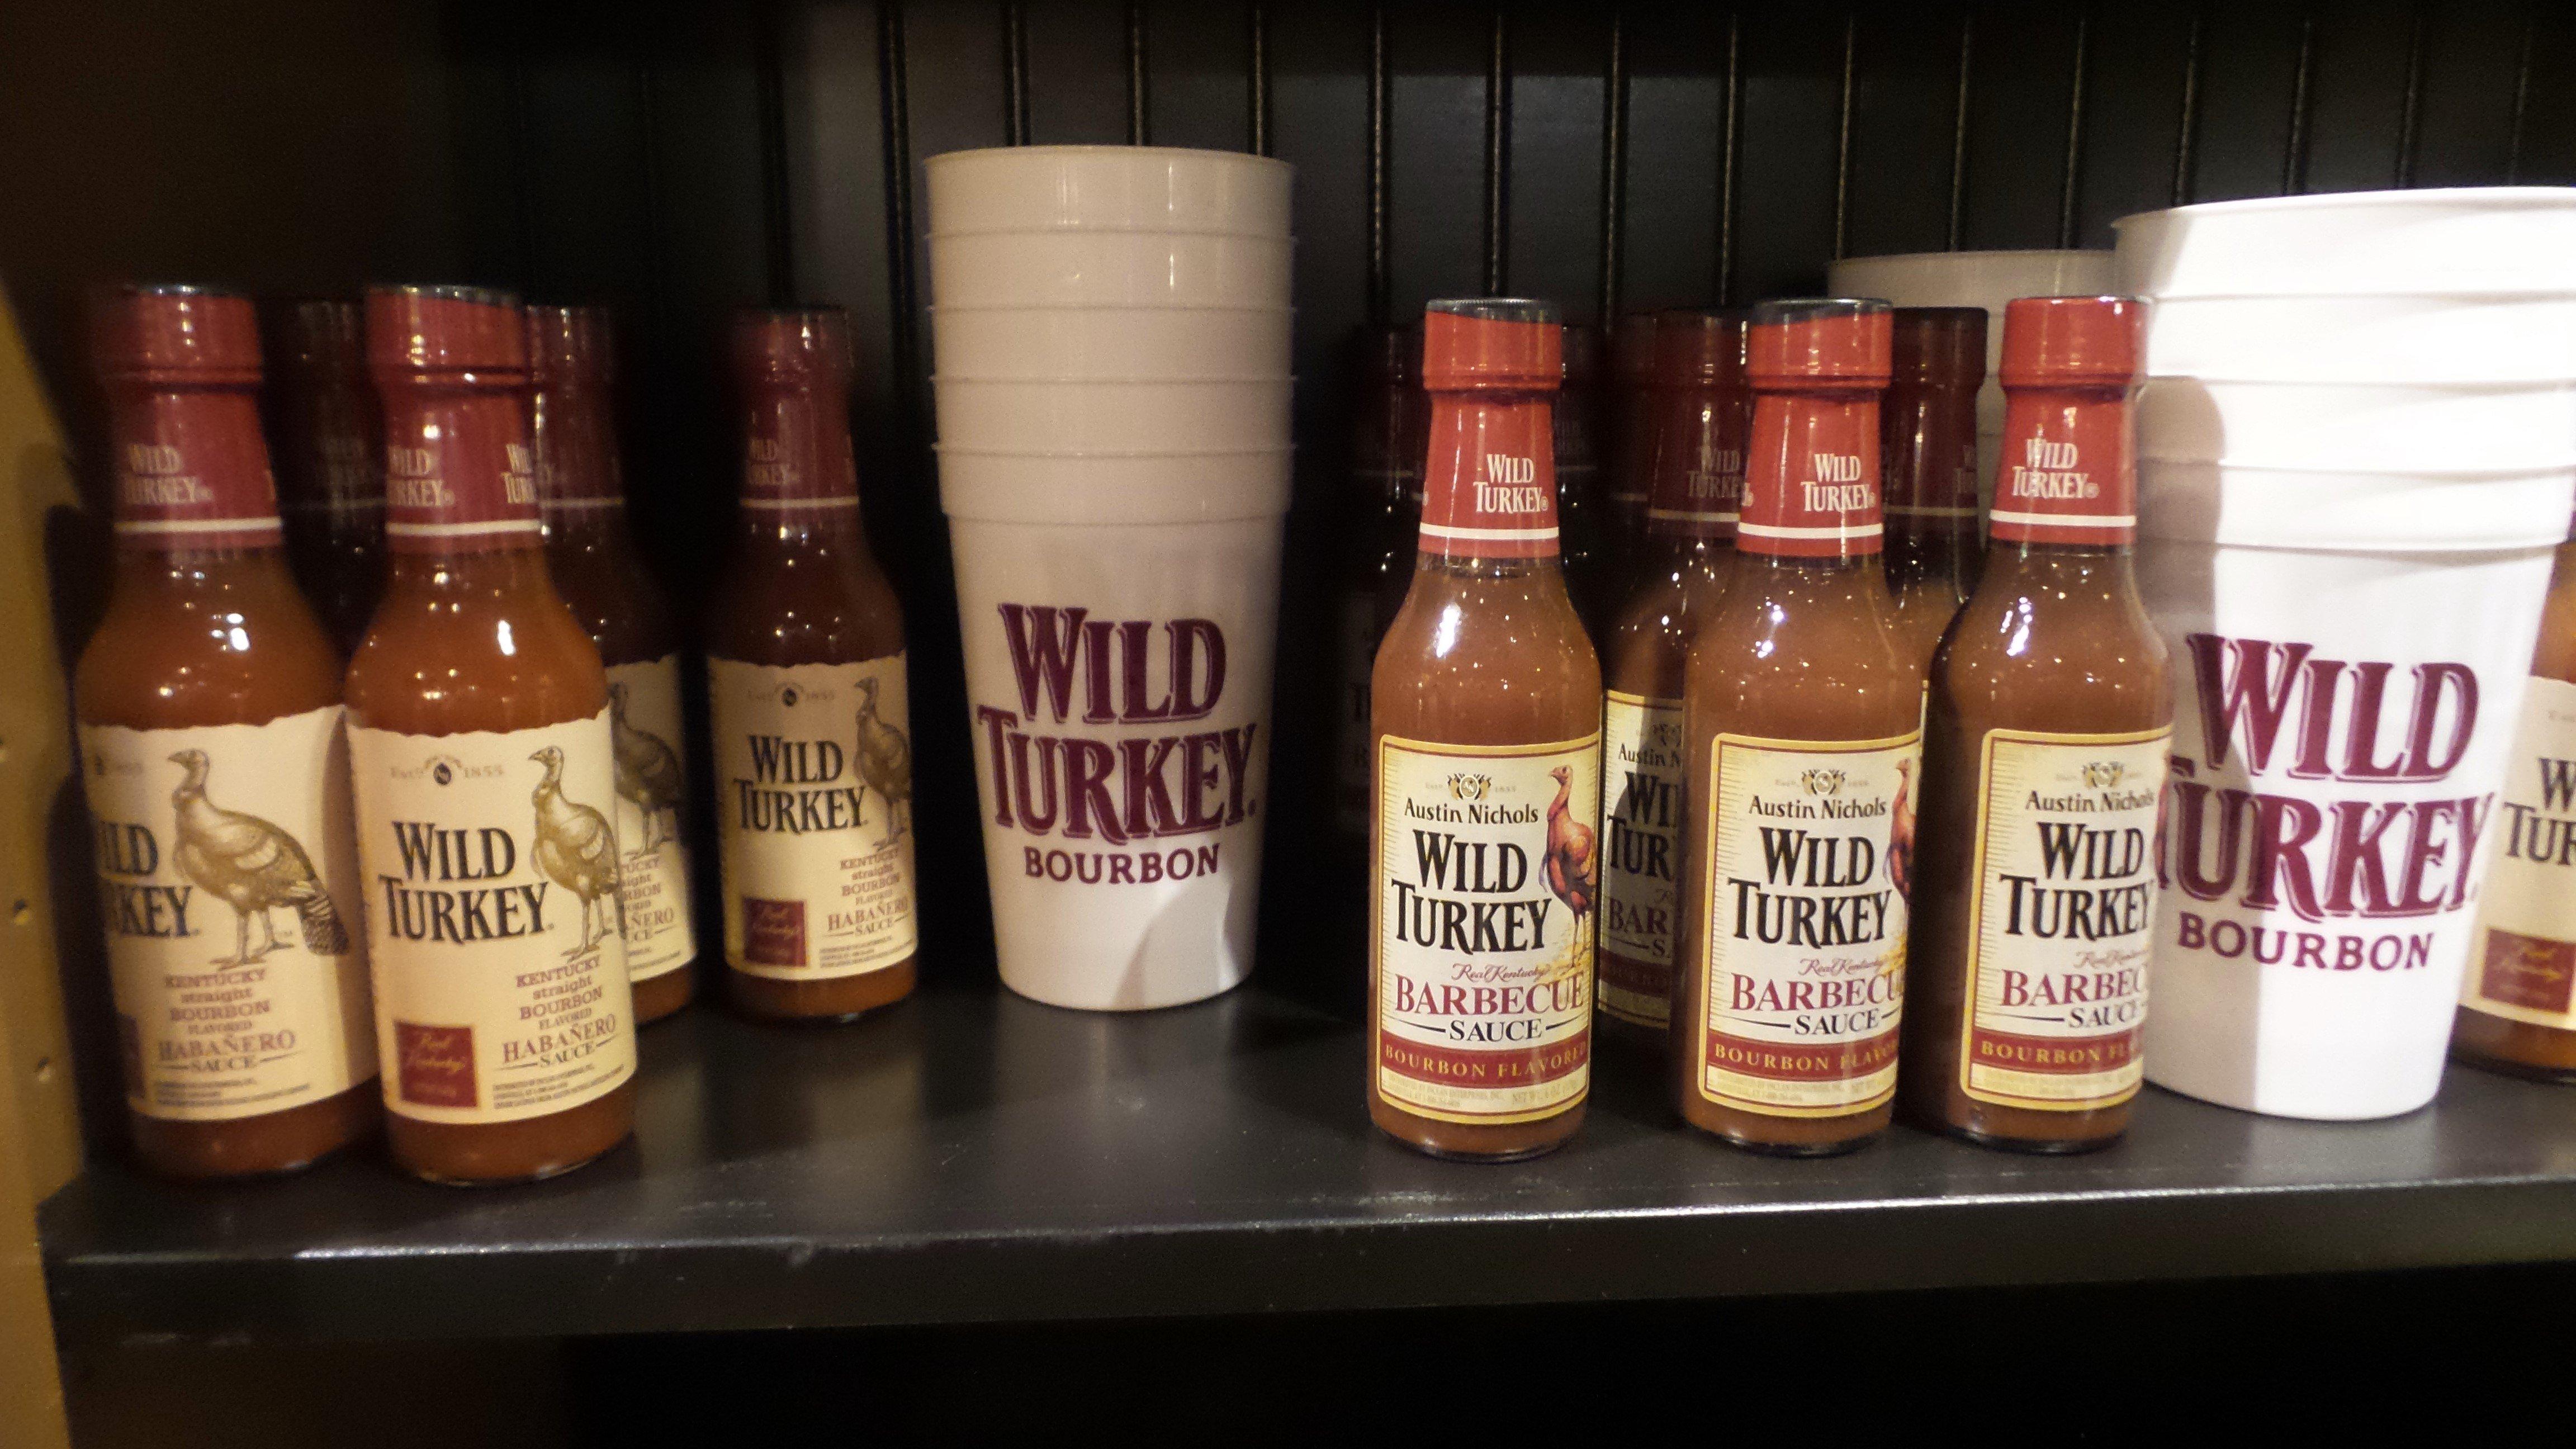 Show sponsor Wild Turkey Bourbon had their hot and barbecue sauces at Wild Turkey booth.